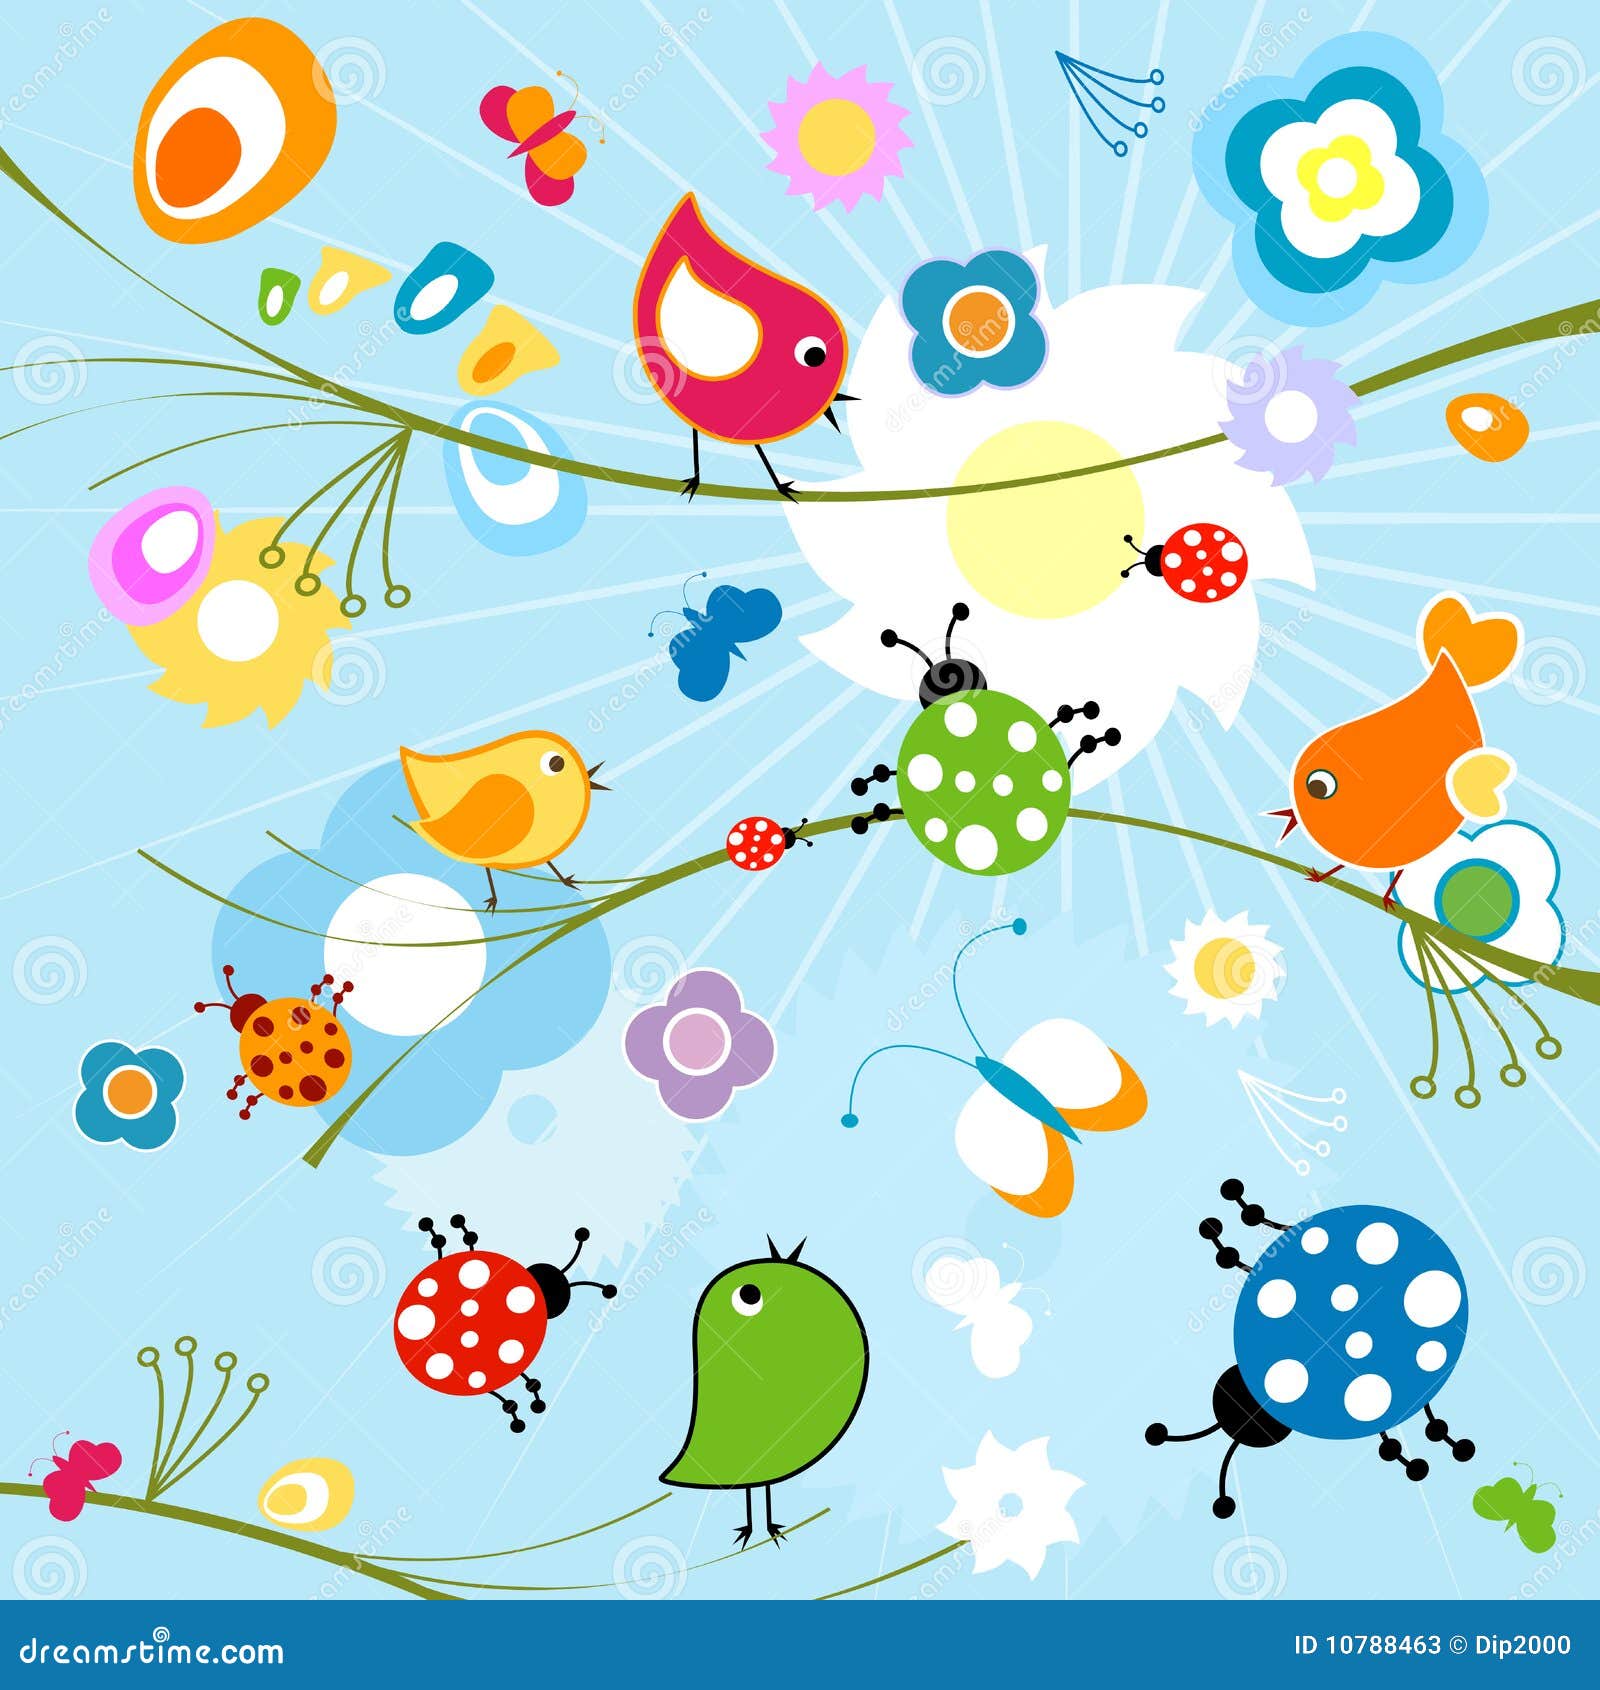 Funny background. Insects and cute birds, seamless pattern